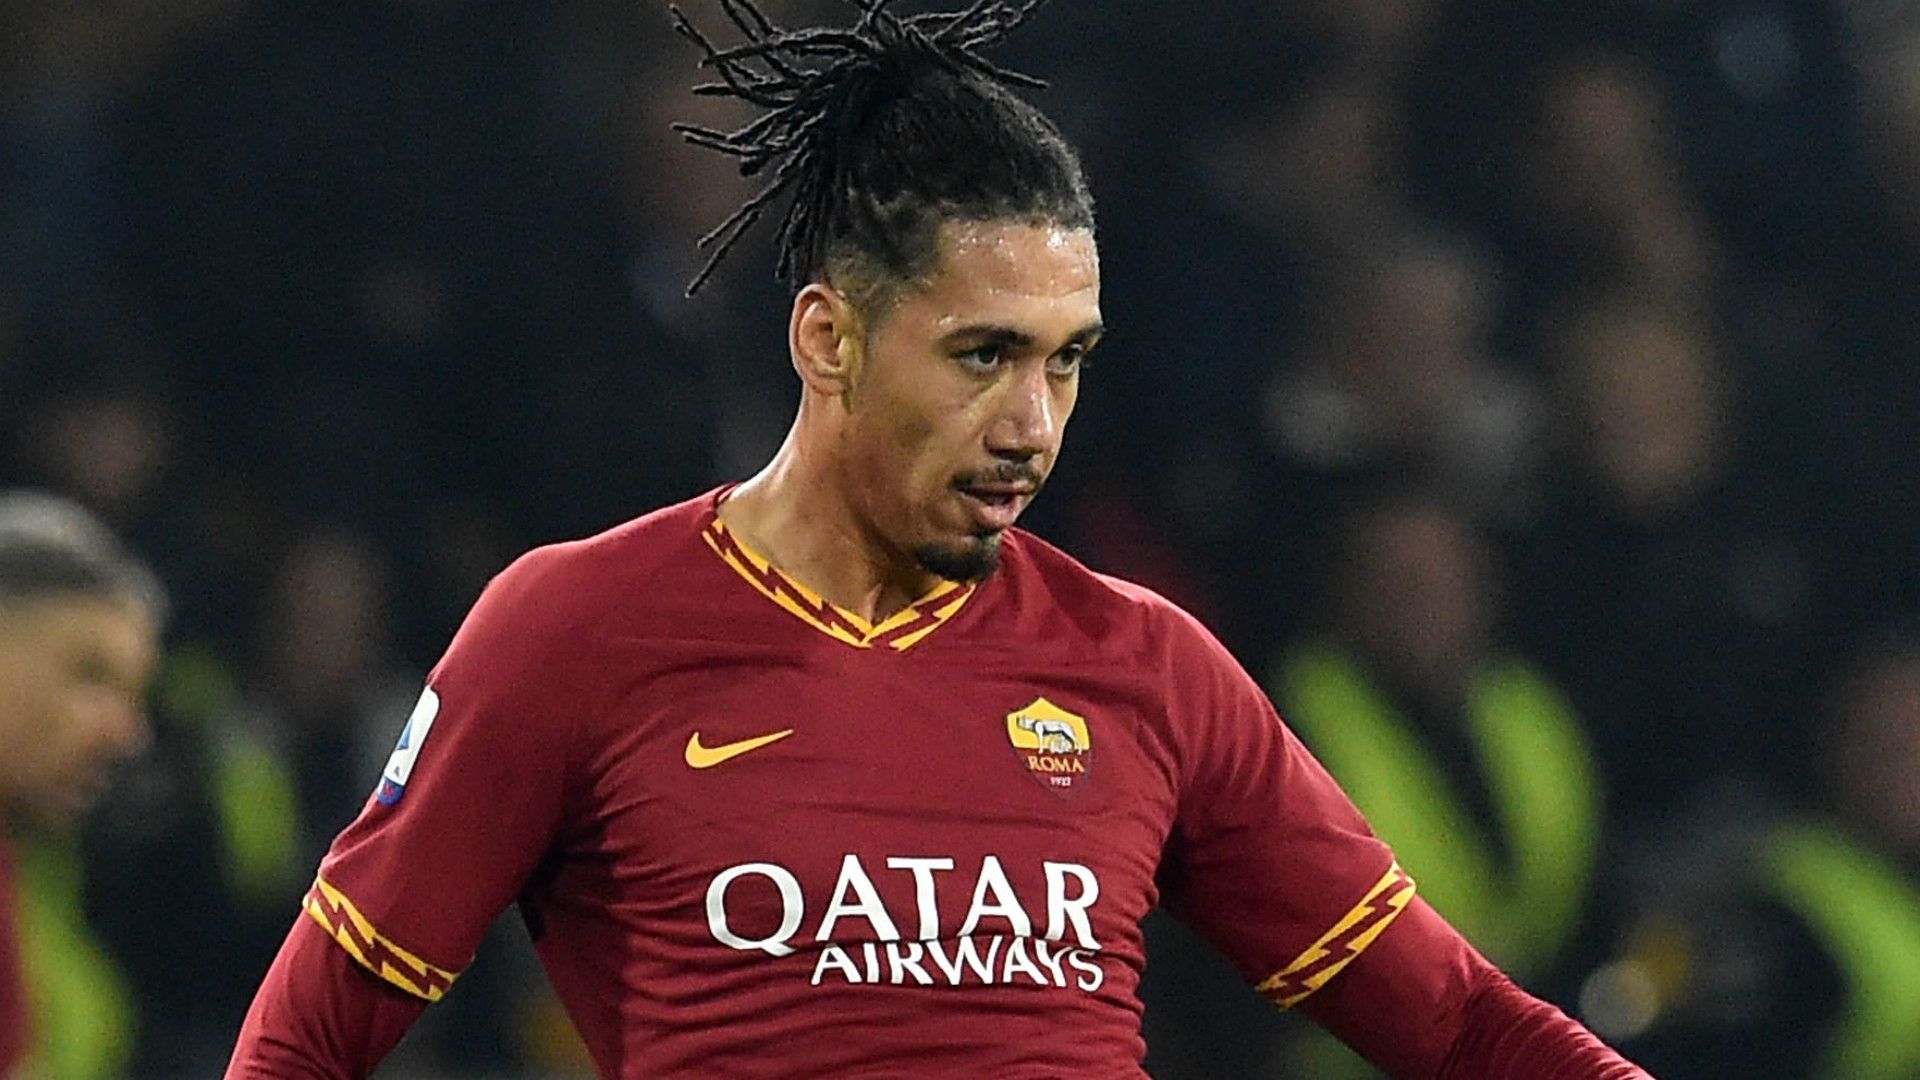 Roma 'will do everything' to keep Smalling, says Fonseca